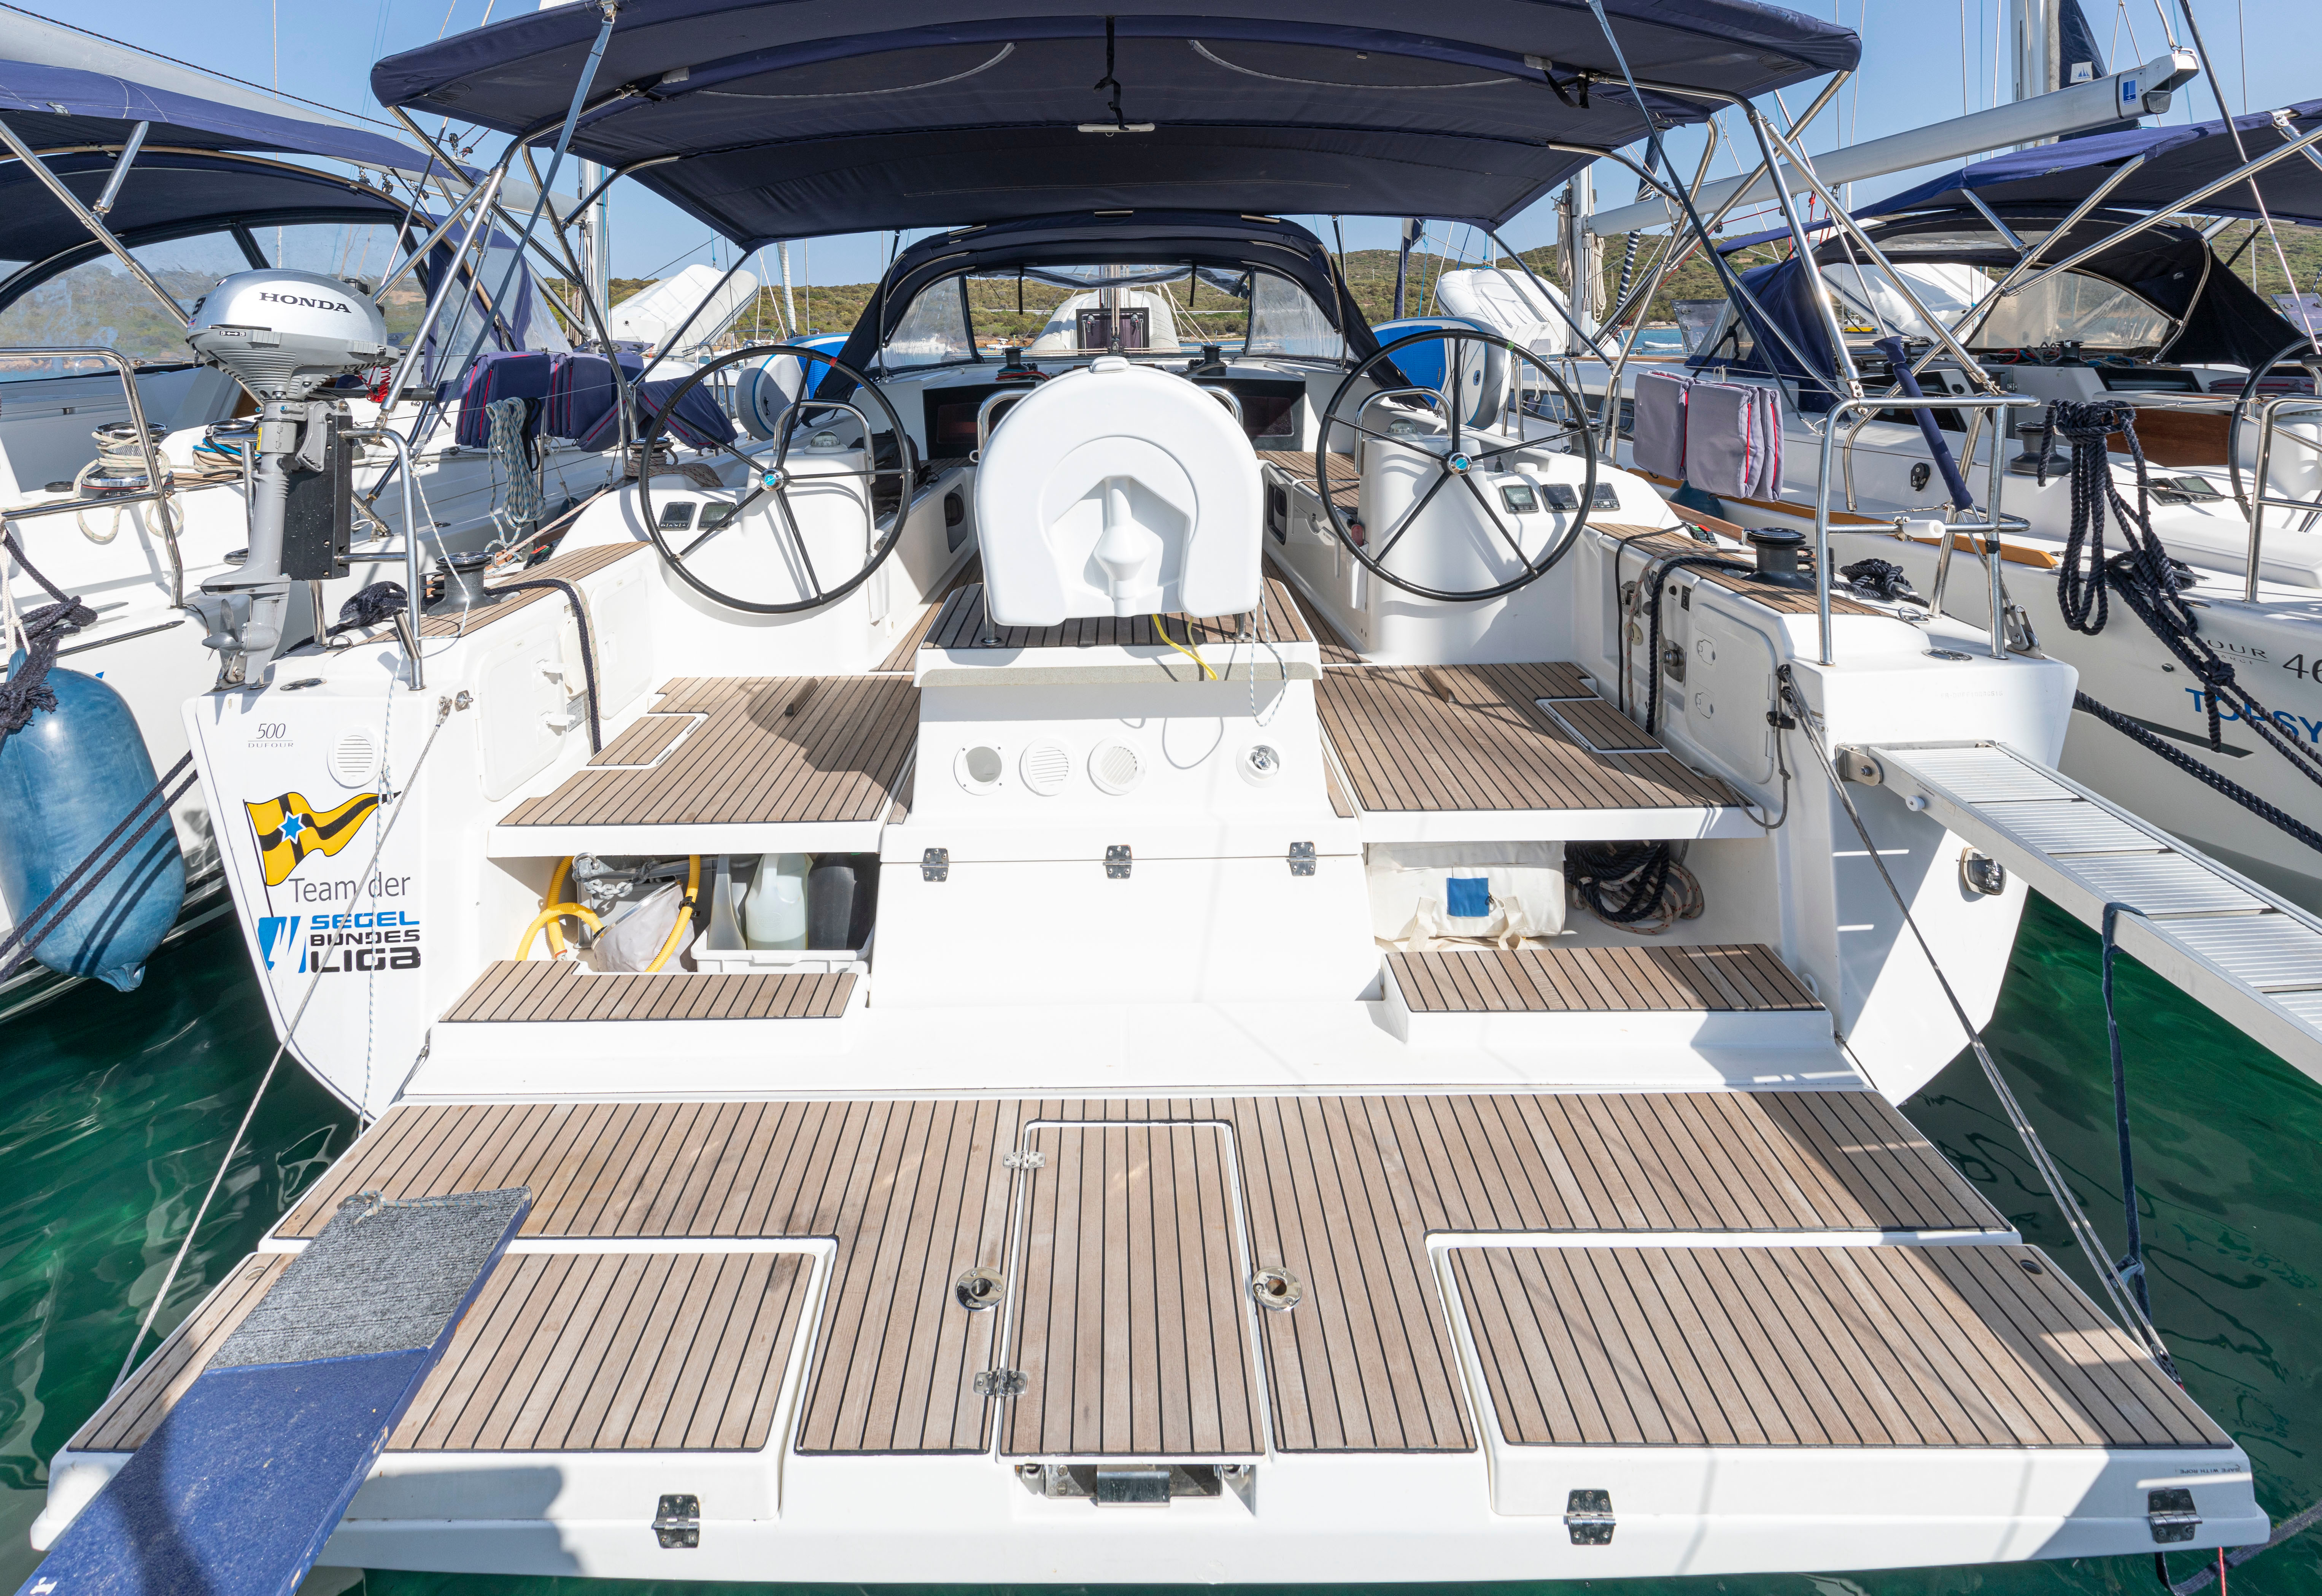 Dufour 500 Grand Large - Yacht Charter San Vincenzo & Boat hire in Italy San Vincenzo Marina di San Vincenzo 4